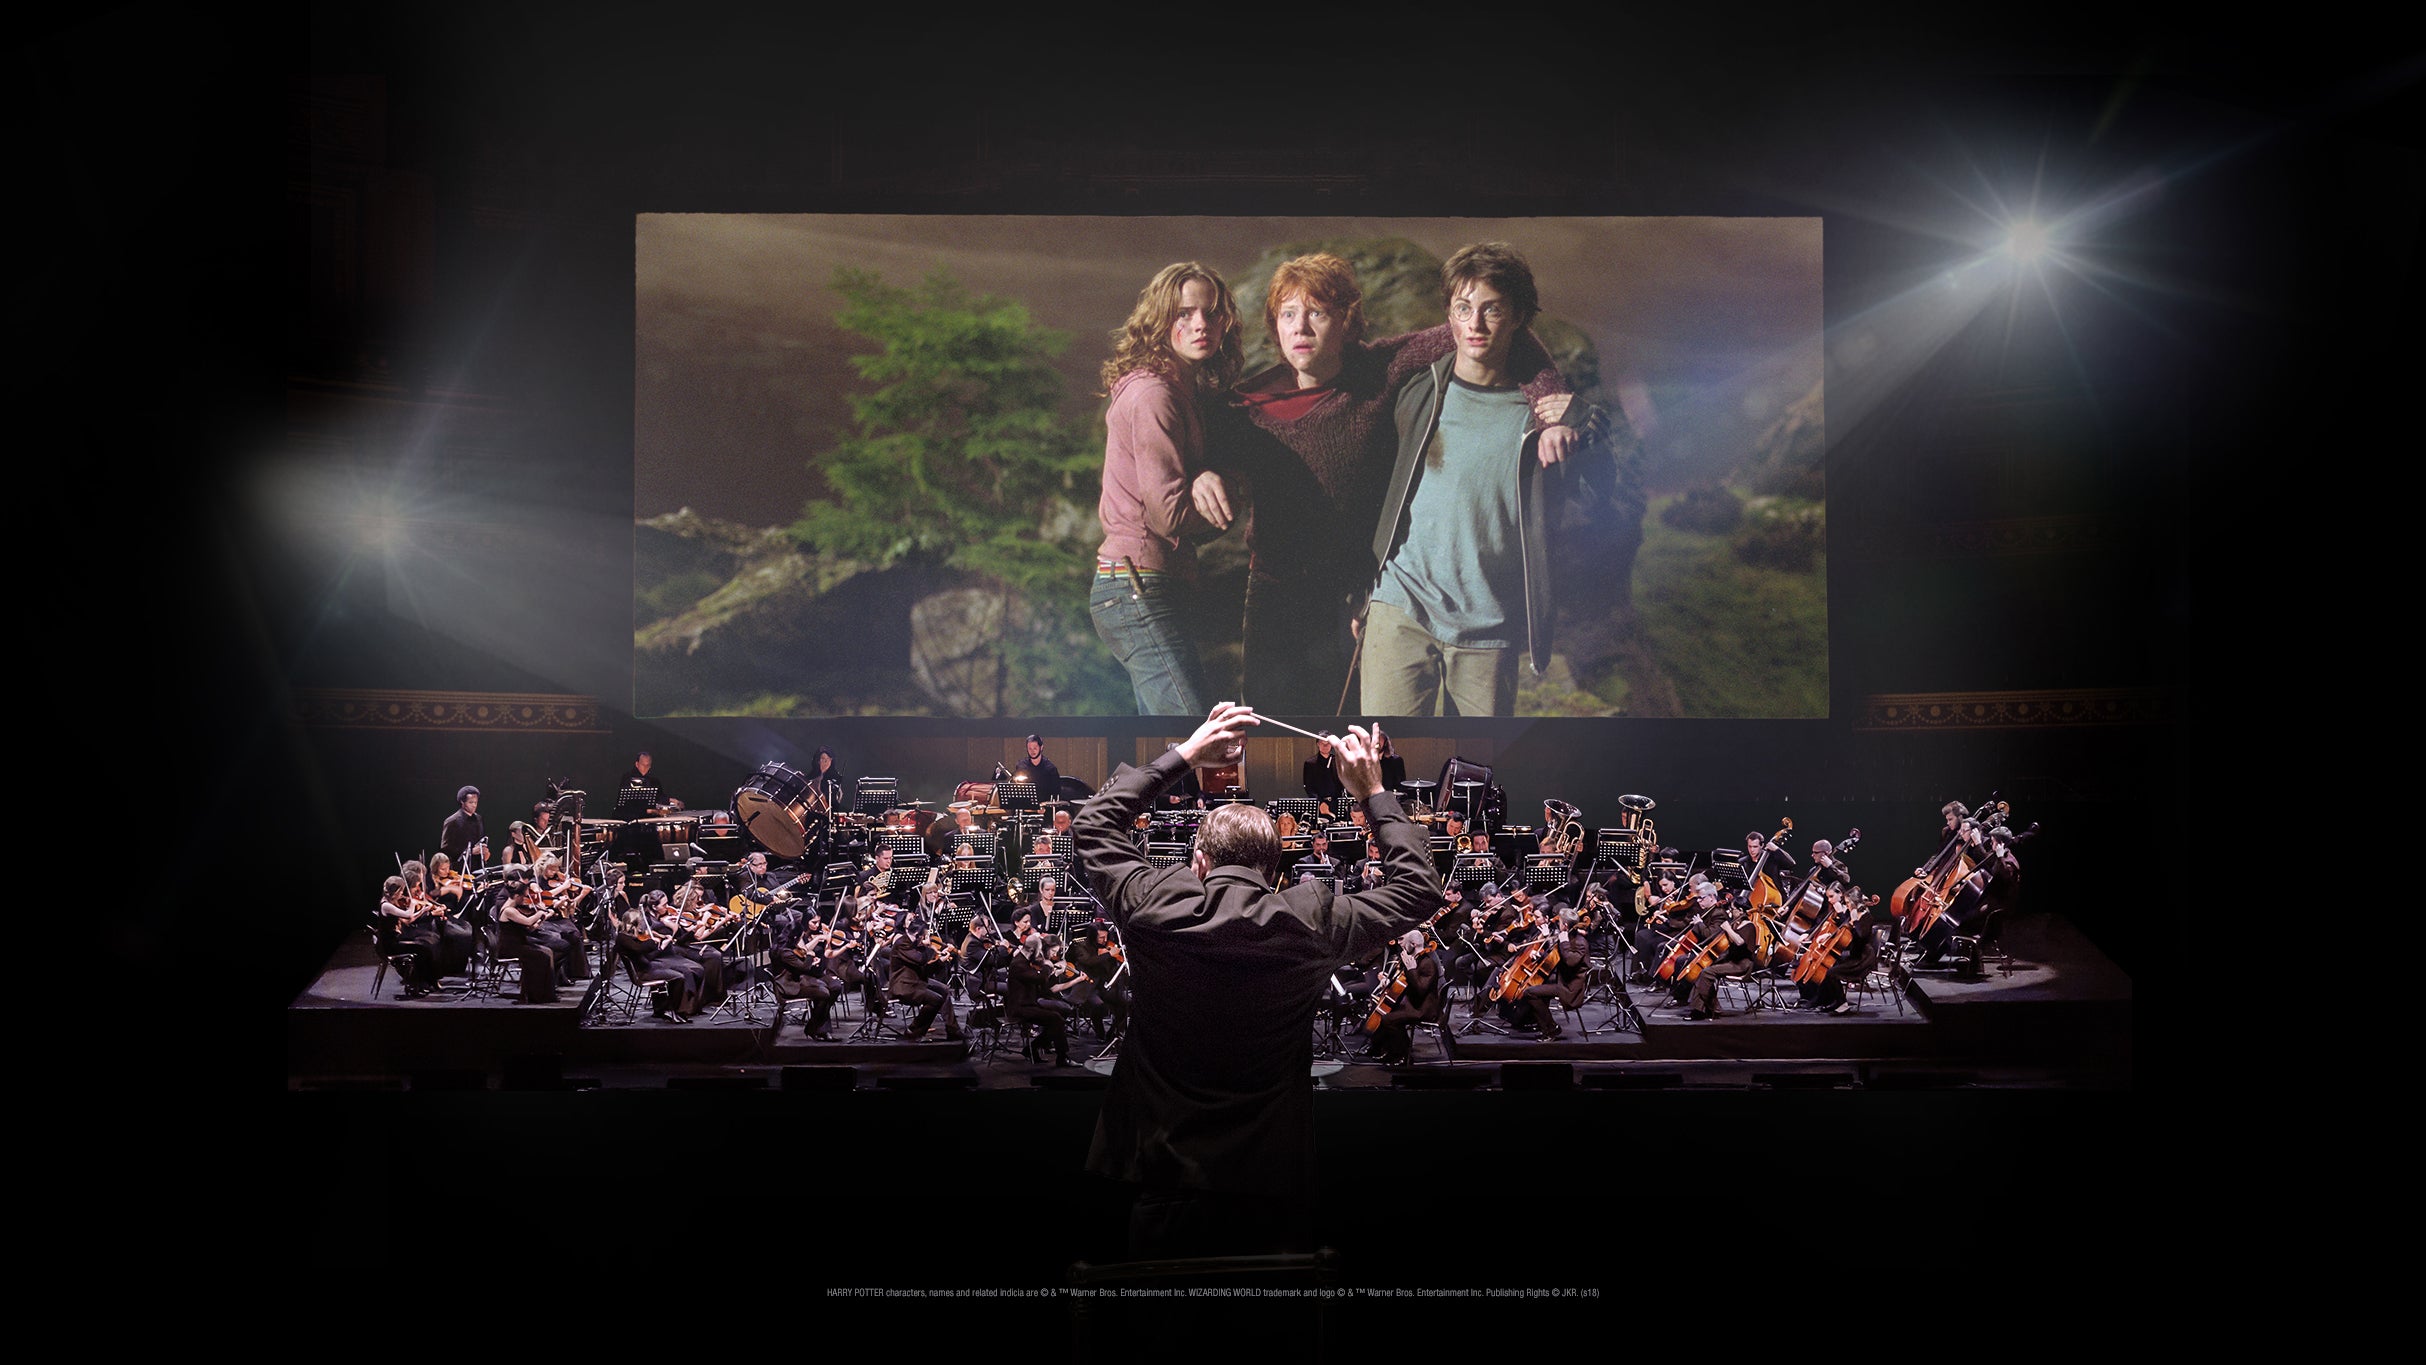 Harry Potter and the Sorcerer's Stone (TM) In Concert